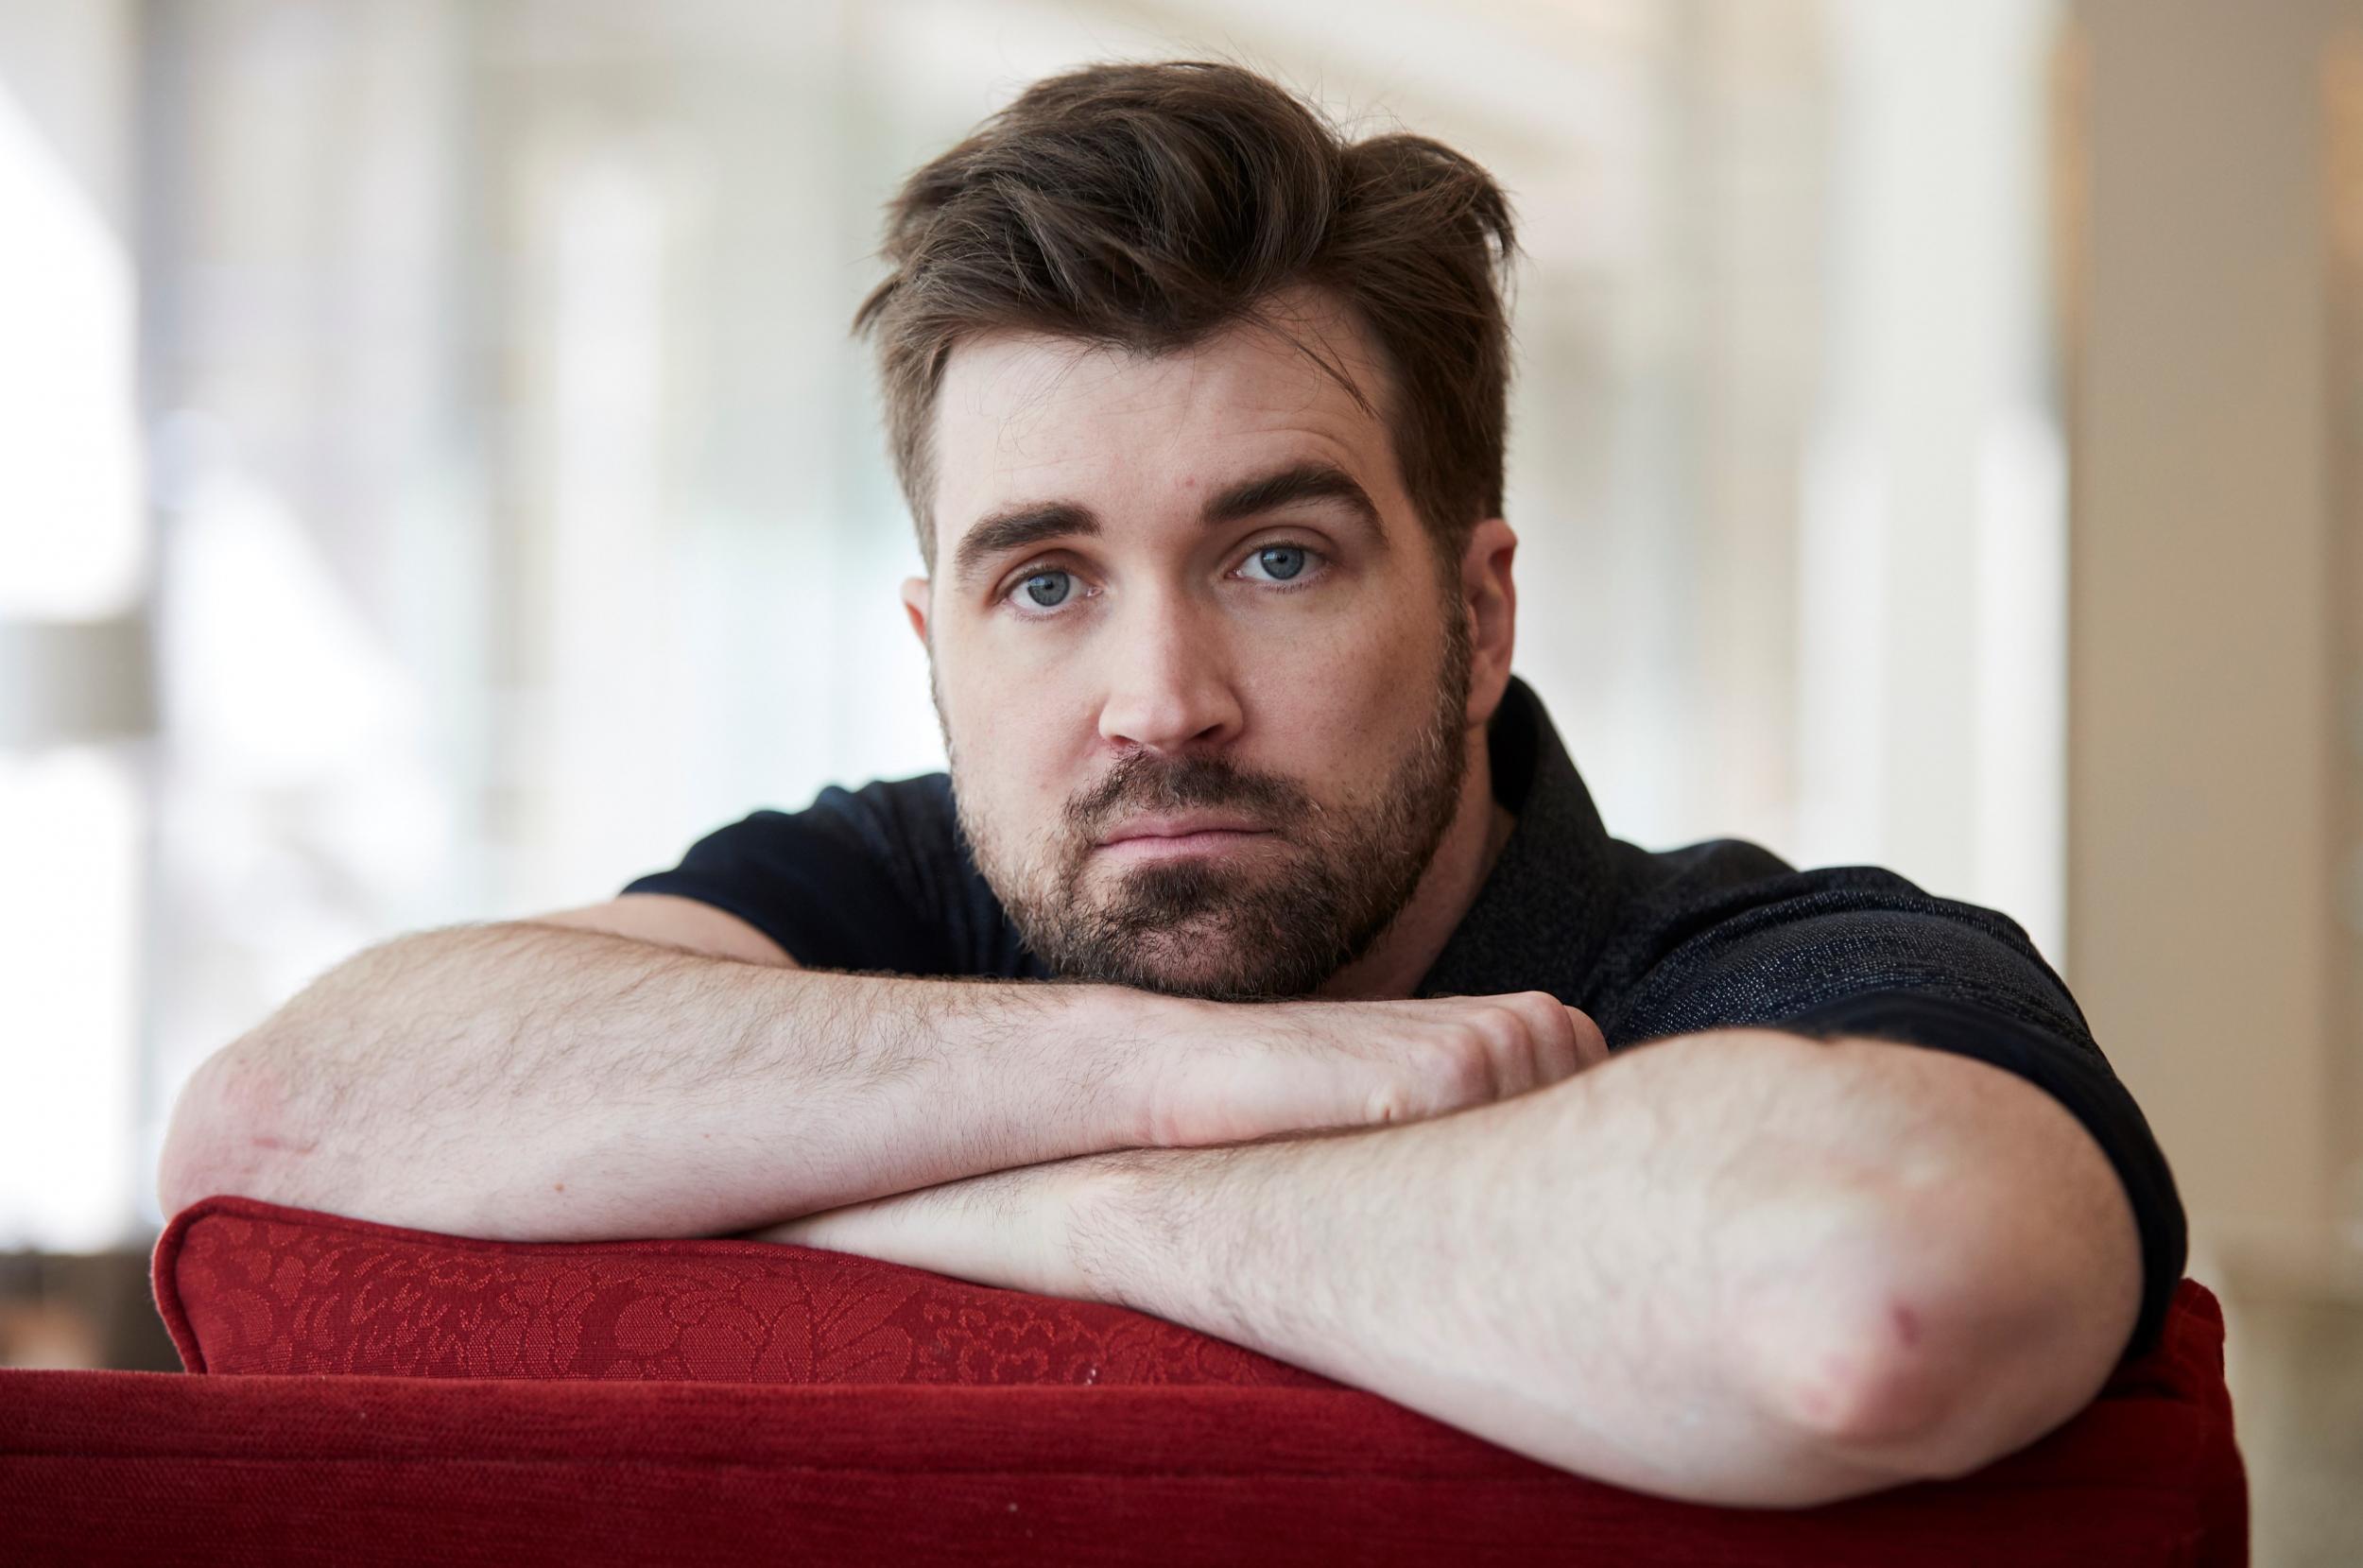 Dan Mallory was accused of lying about having cancer, along with telling several other falsehoods about his family's health, in an extensive article by the New Yorker